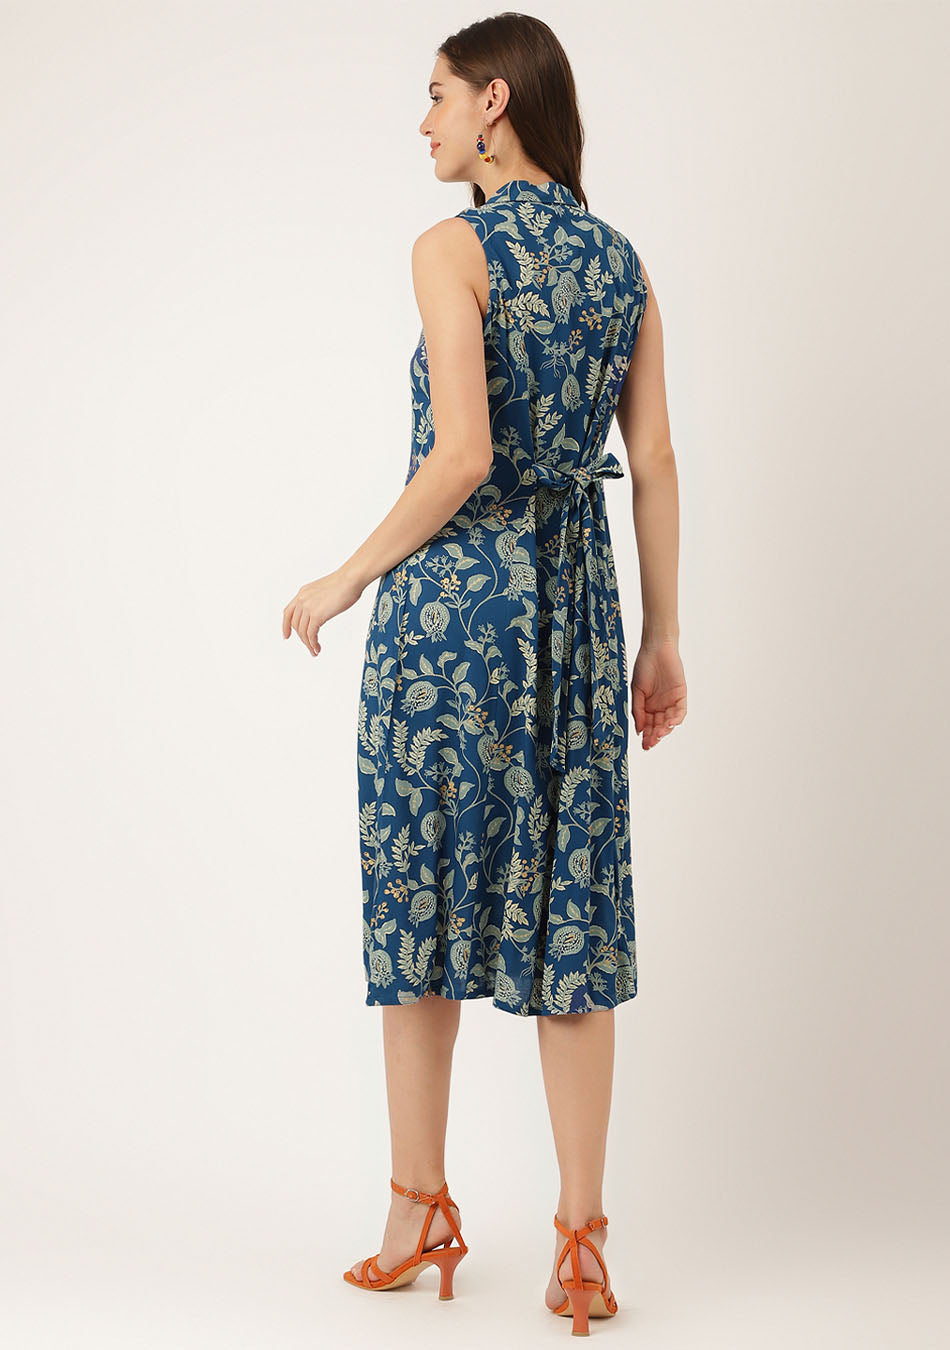 Royal Blue Floral Printed Rayon A-Line Midi Dress with Attached Sleeves